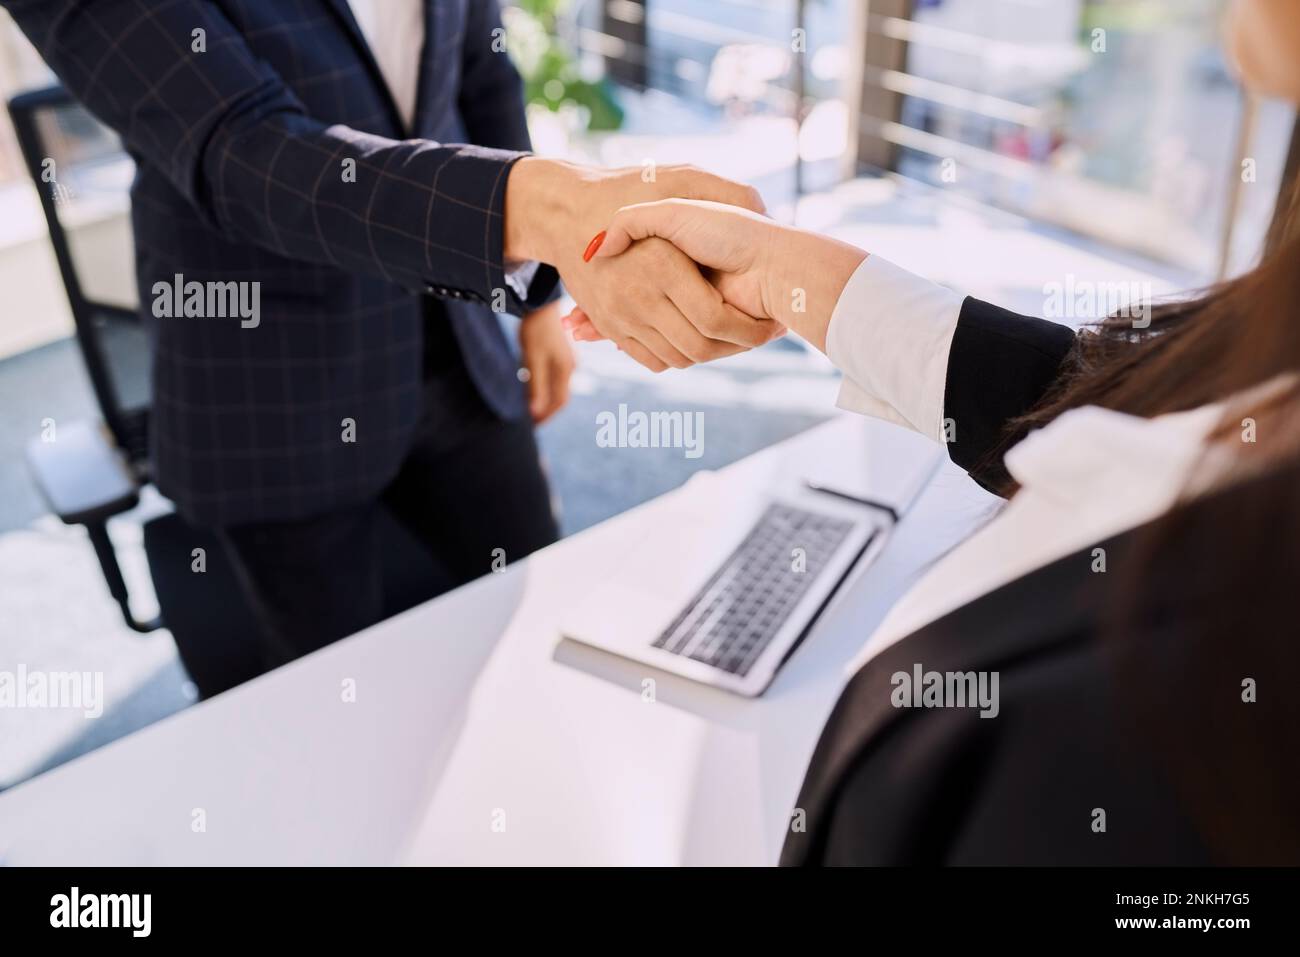 Recruiter and candidate doing handshake after interview at office Stock Photo